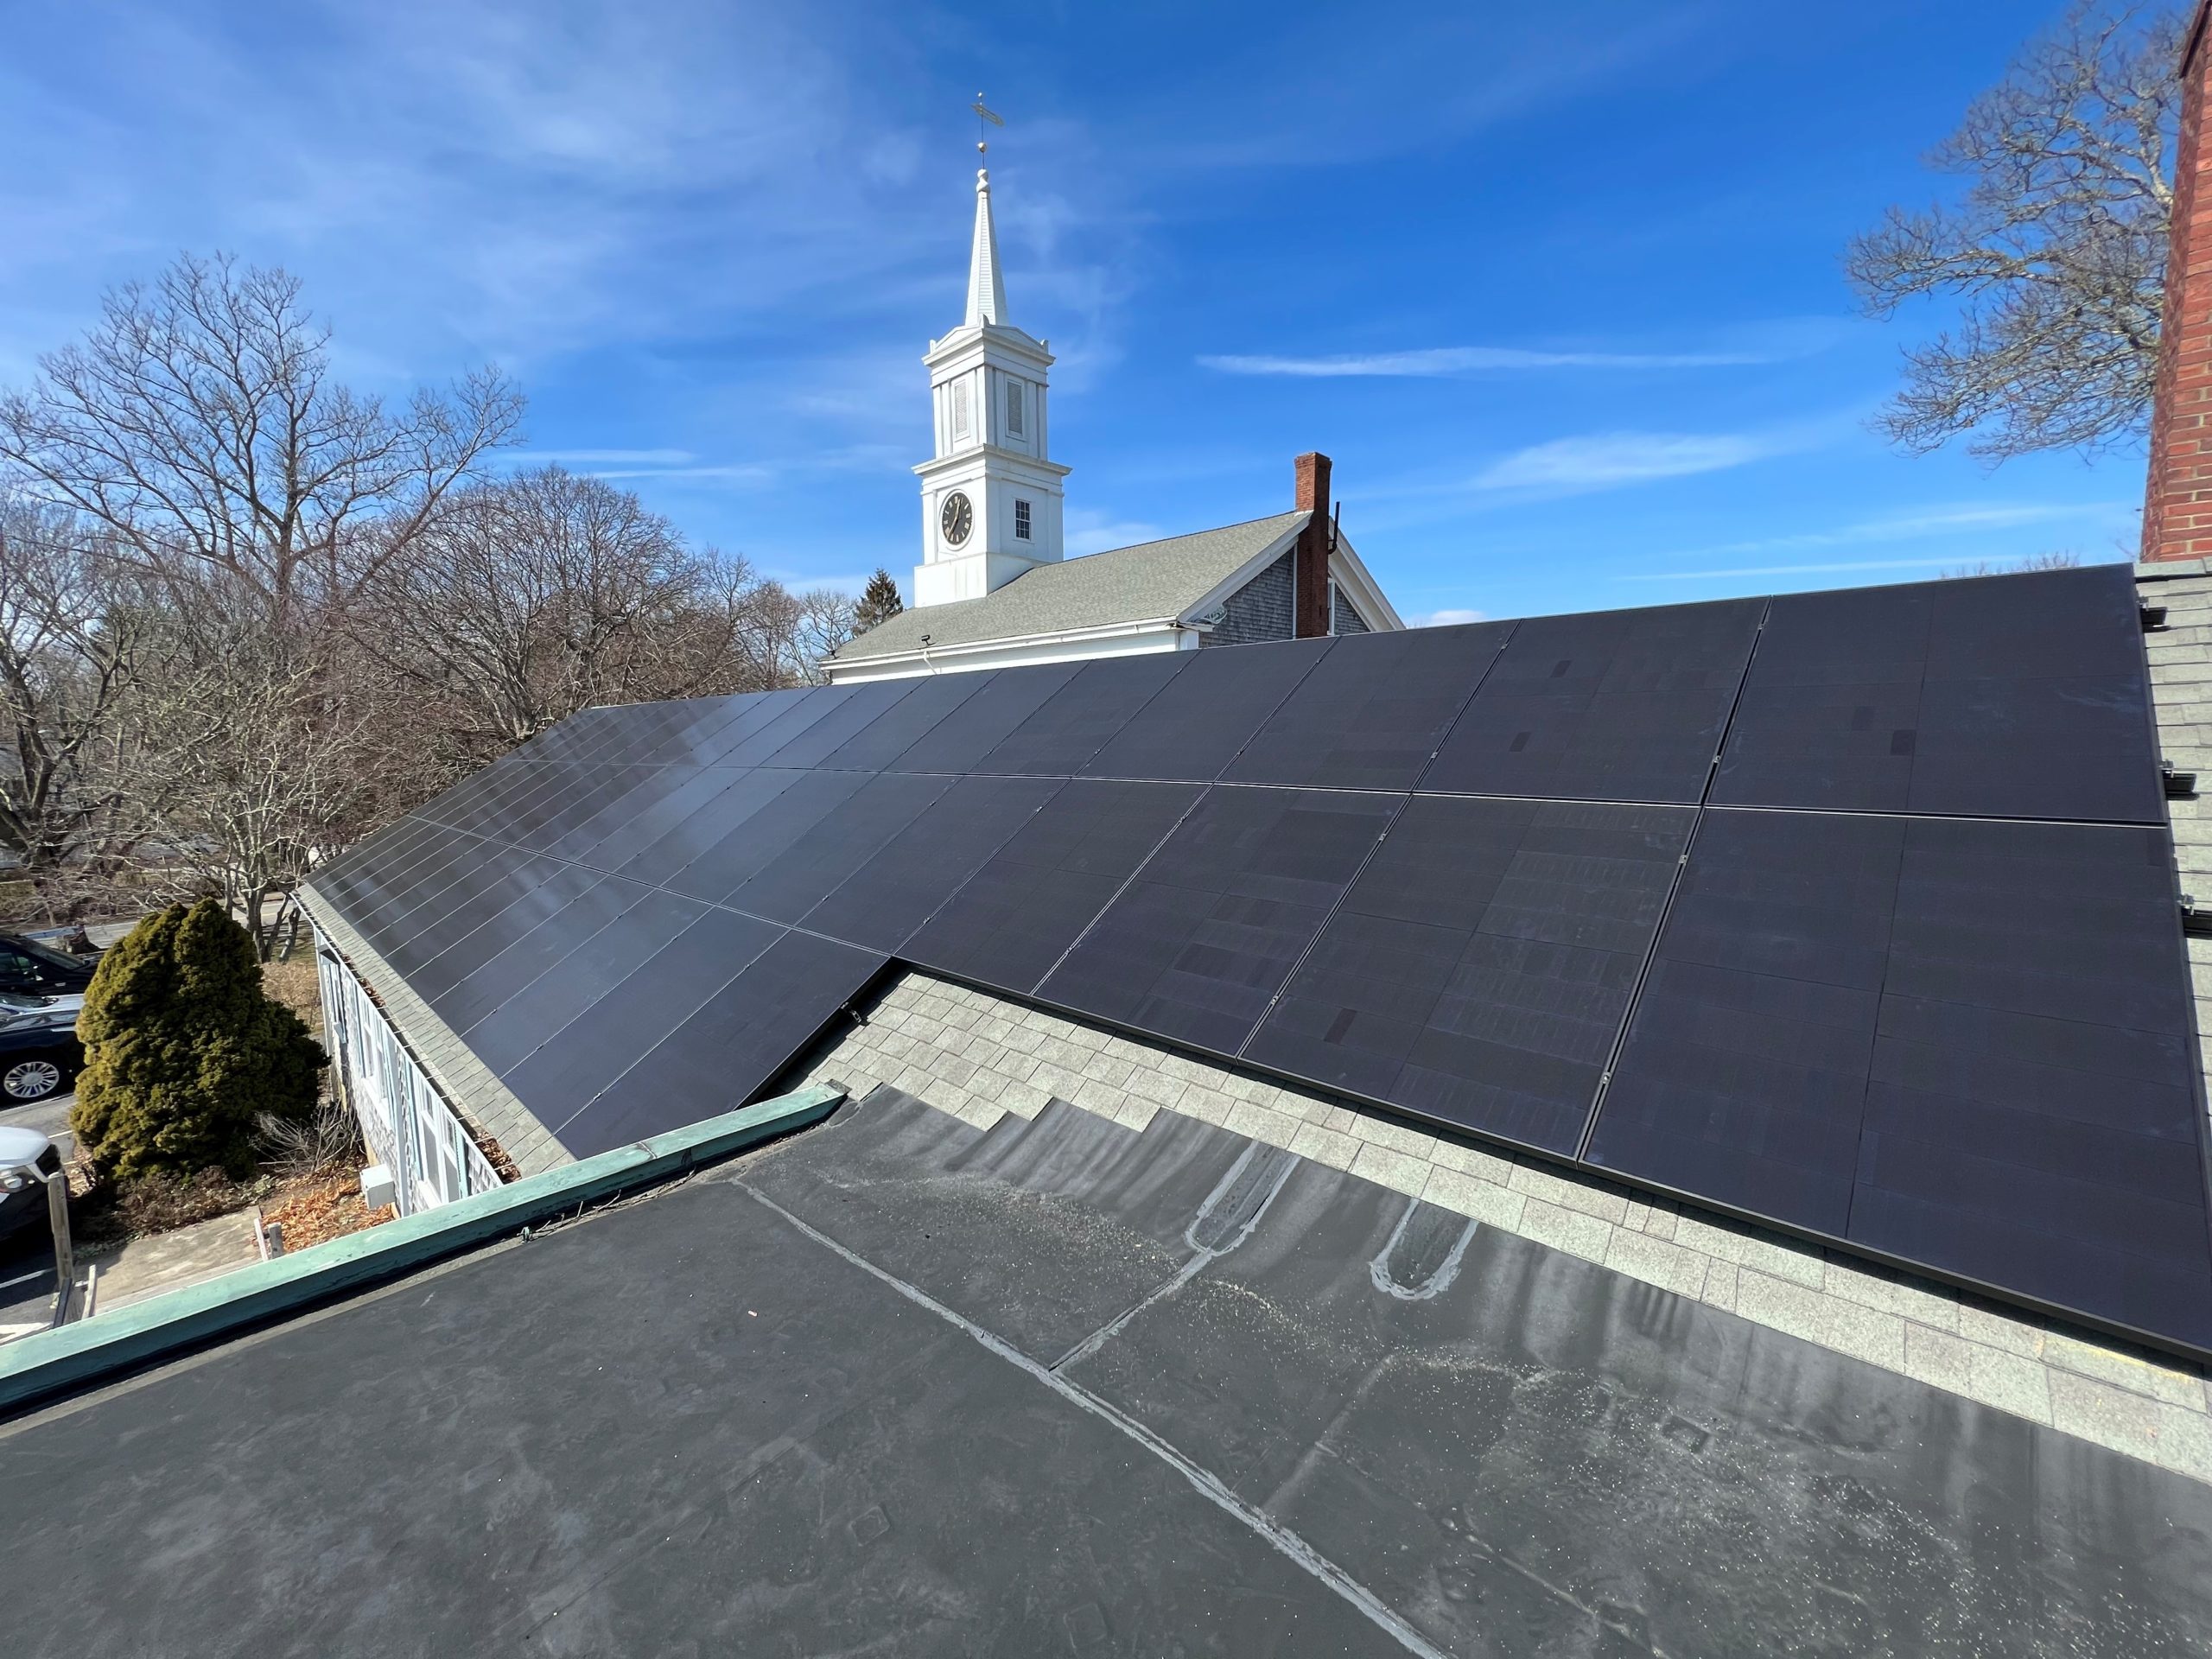 Solar panels on the roof of a church